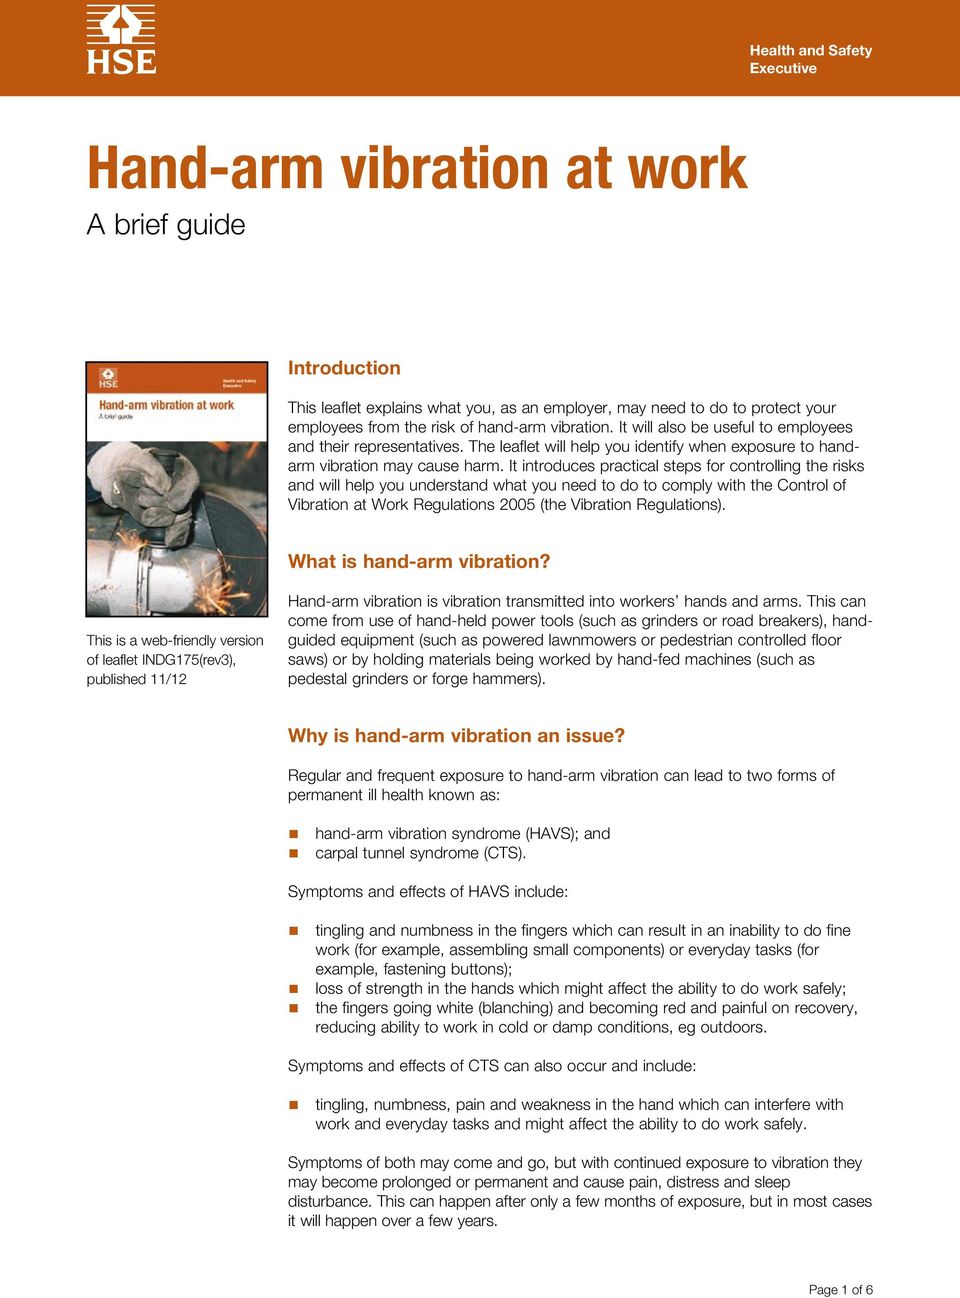 It introduces practical steps for controlling the risks and will help you understand what you need to do to comply with the Control of Vibration at Work Regulations 2005 (the Vibration Regulations).